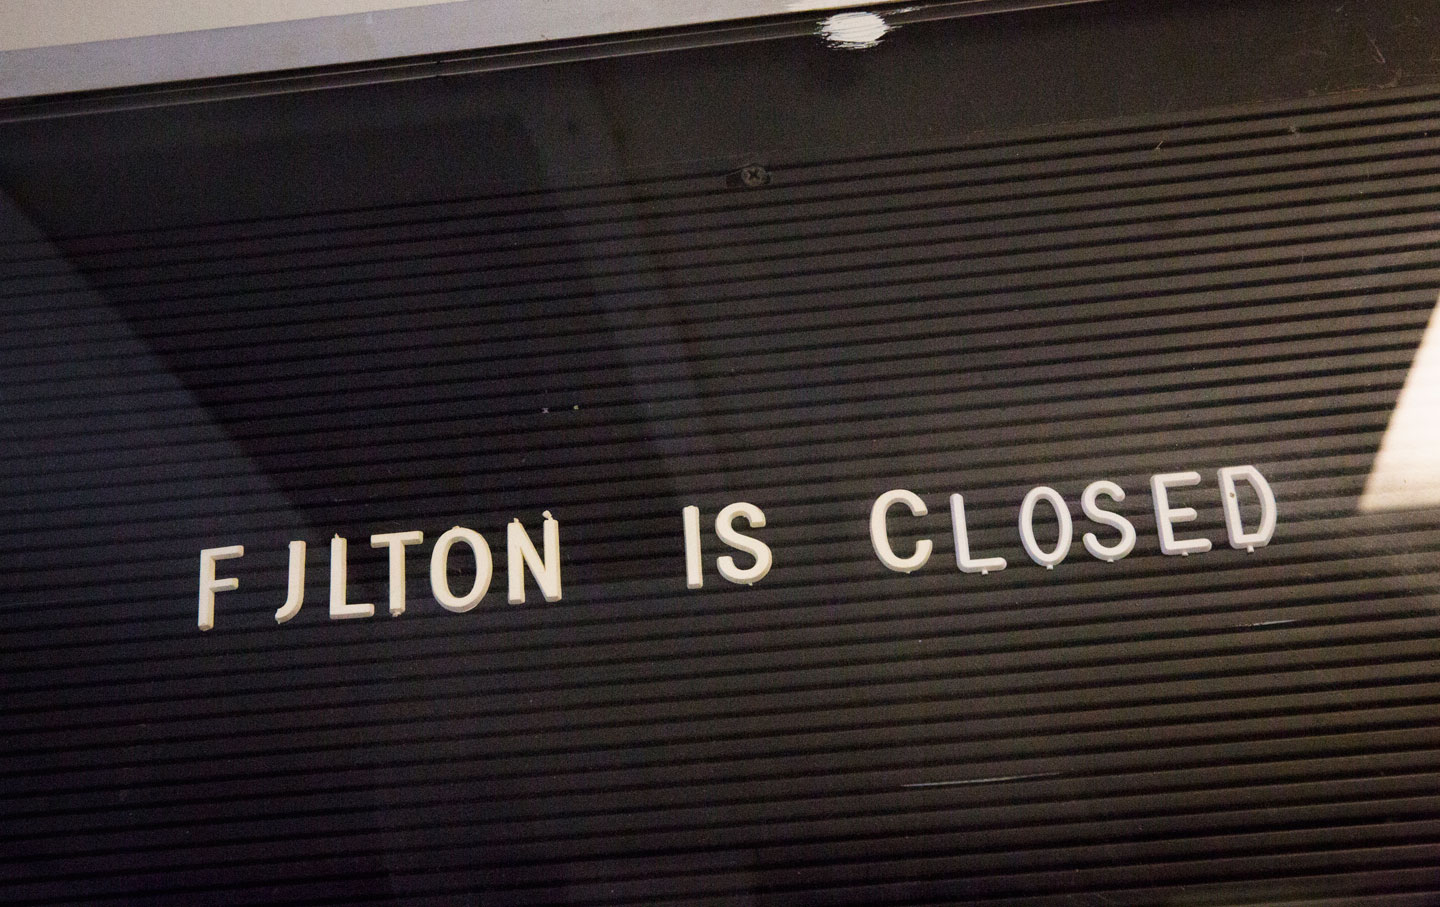 Fulton is one of 13 prisons closed in New York State over the last four years.